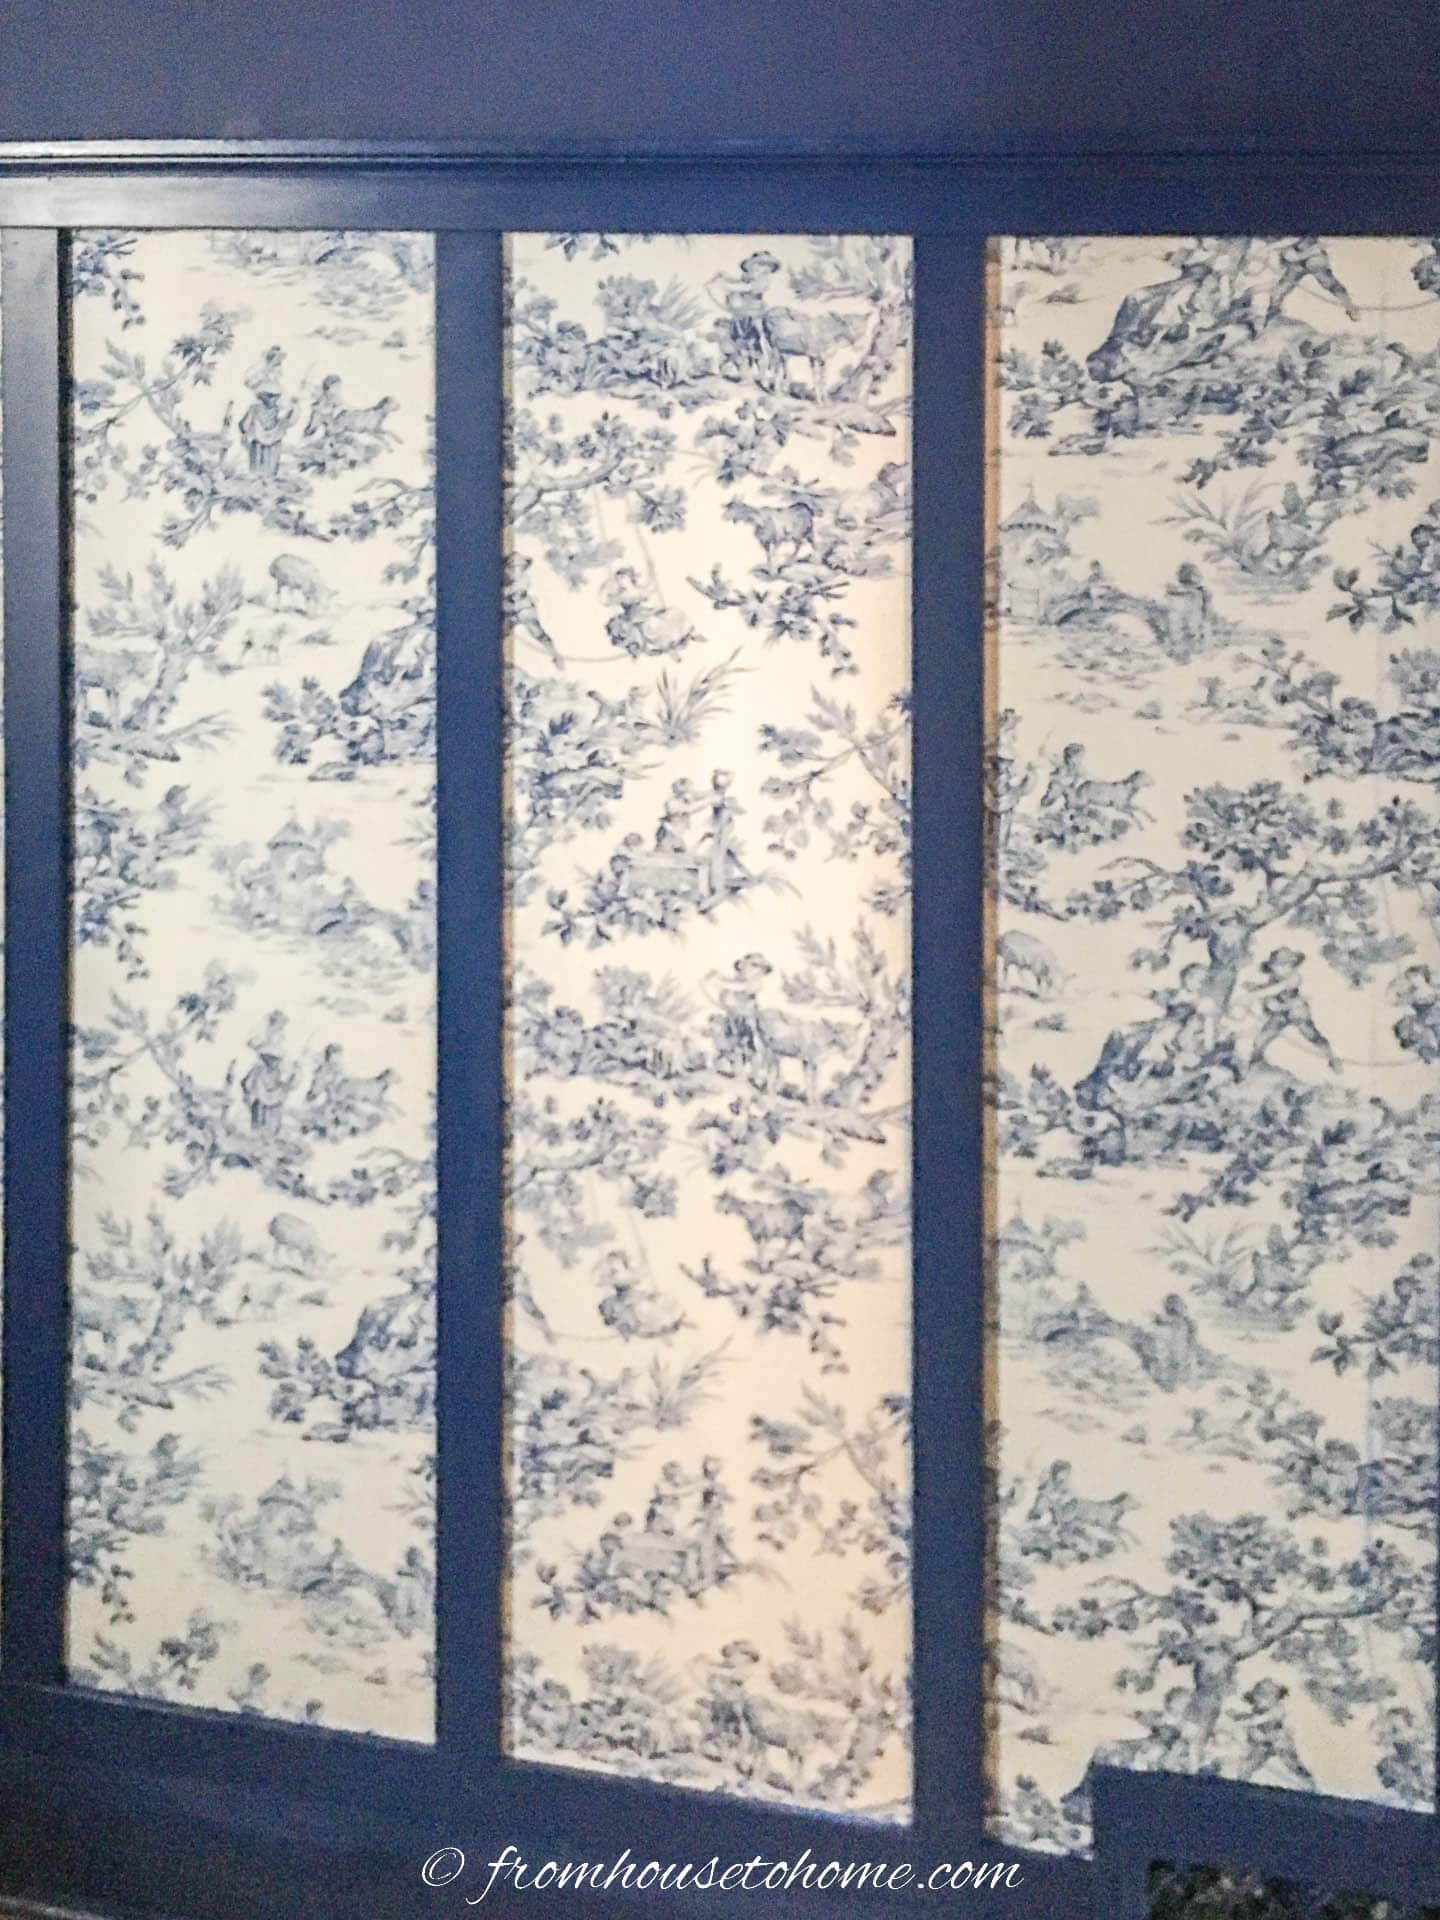 A wall with blue board and batten trim and blue and white toile fabric in between 